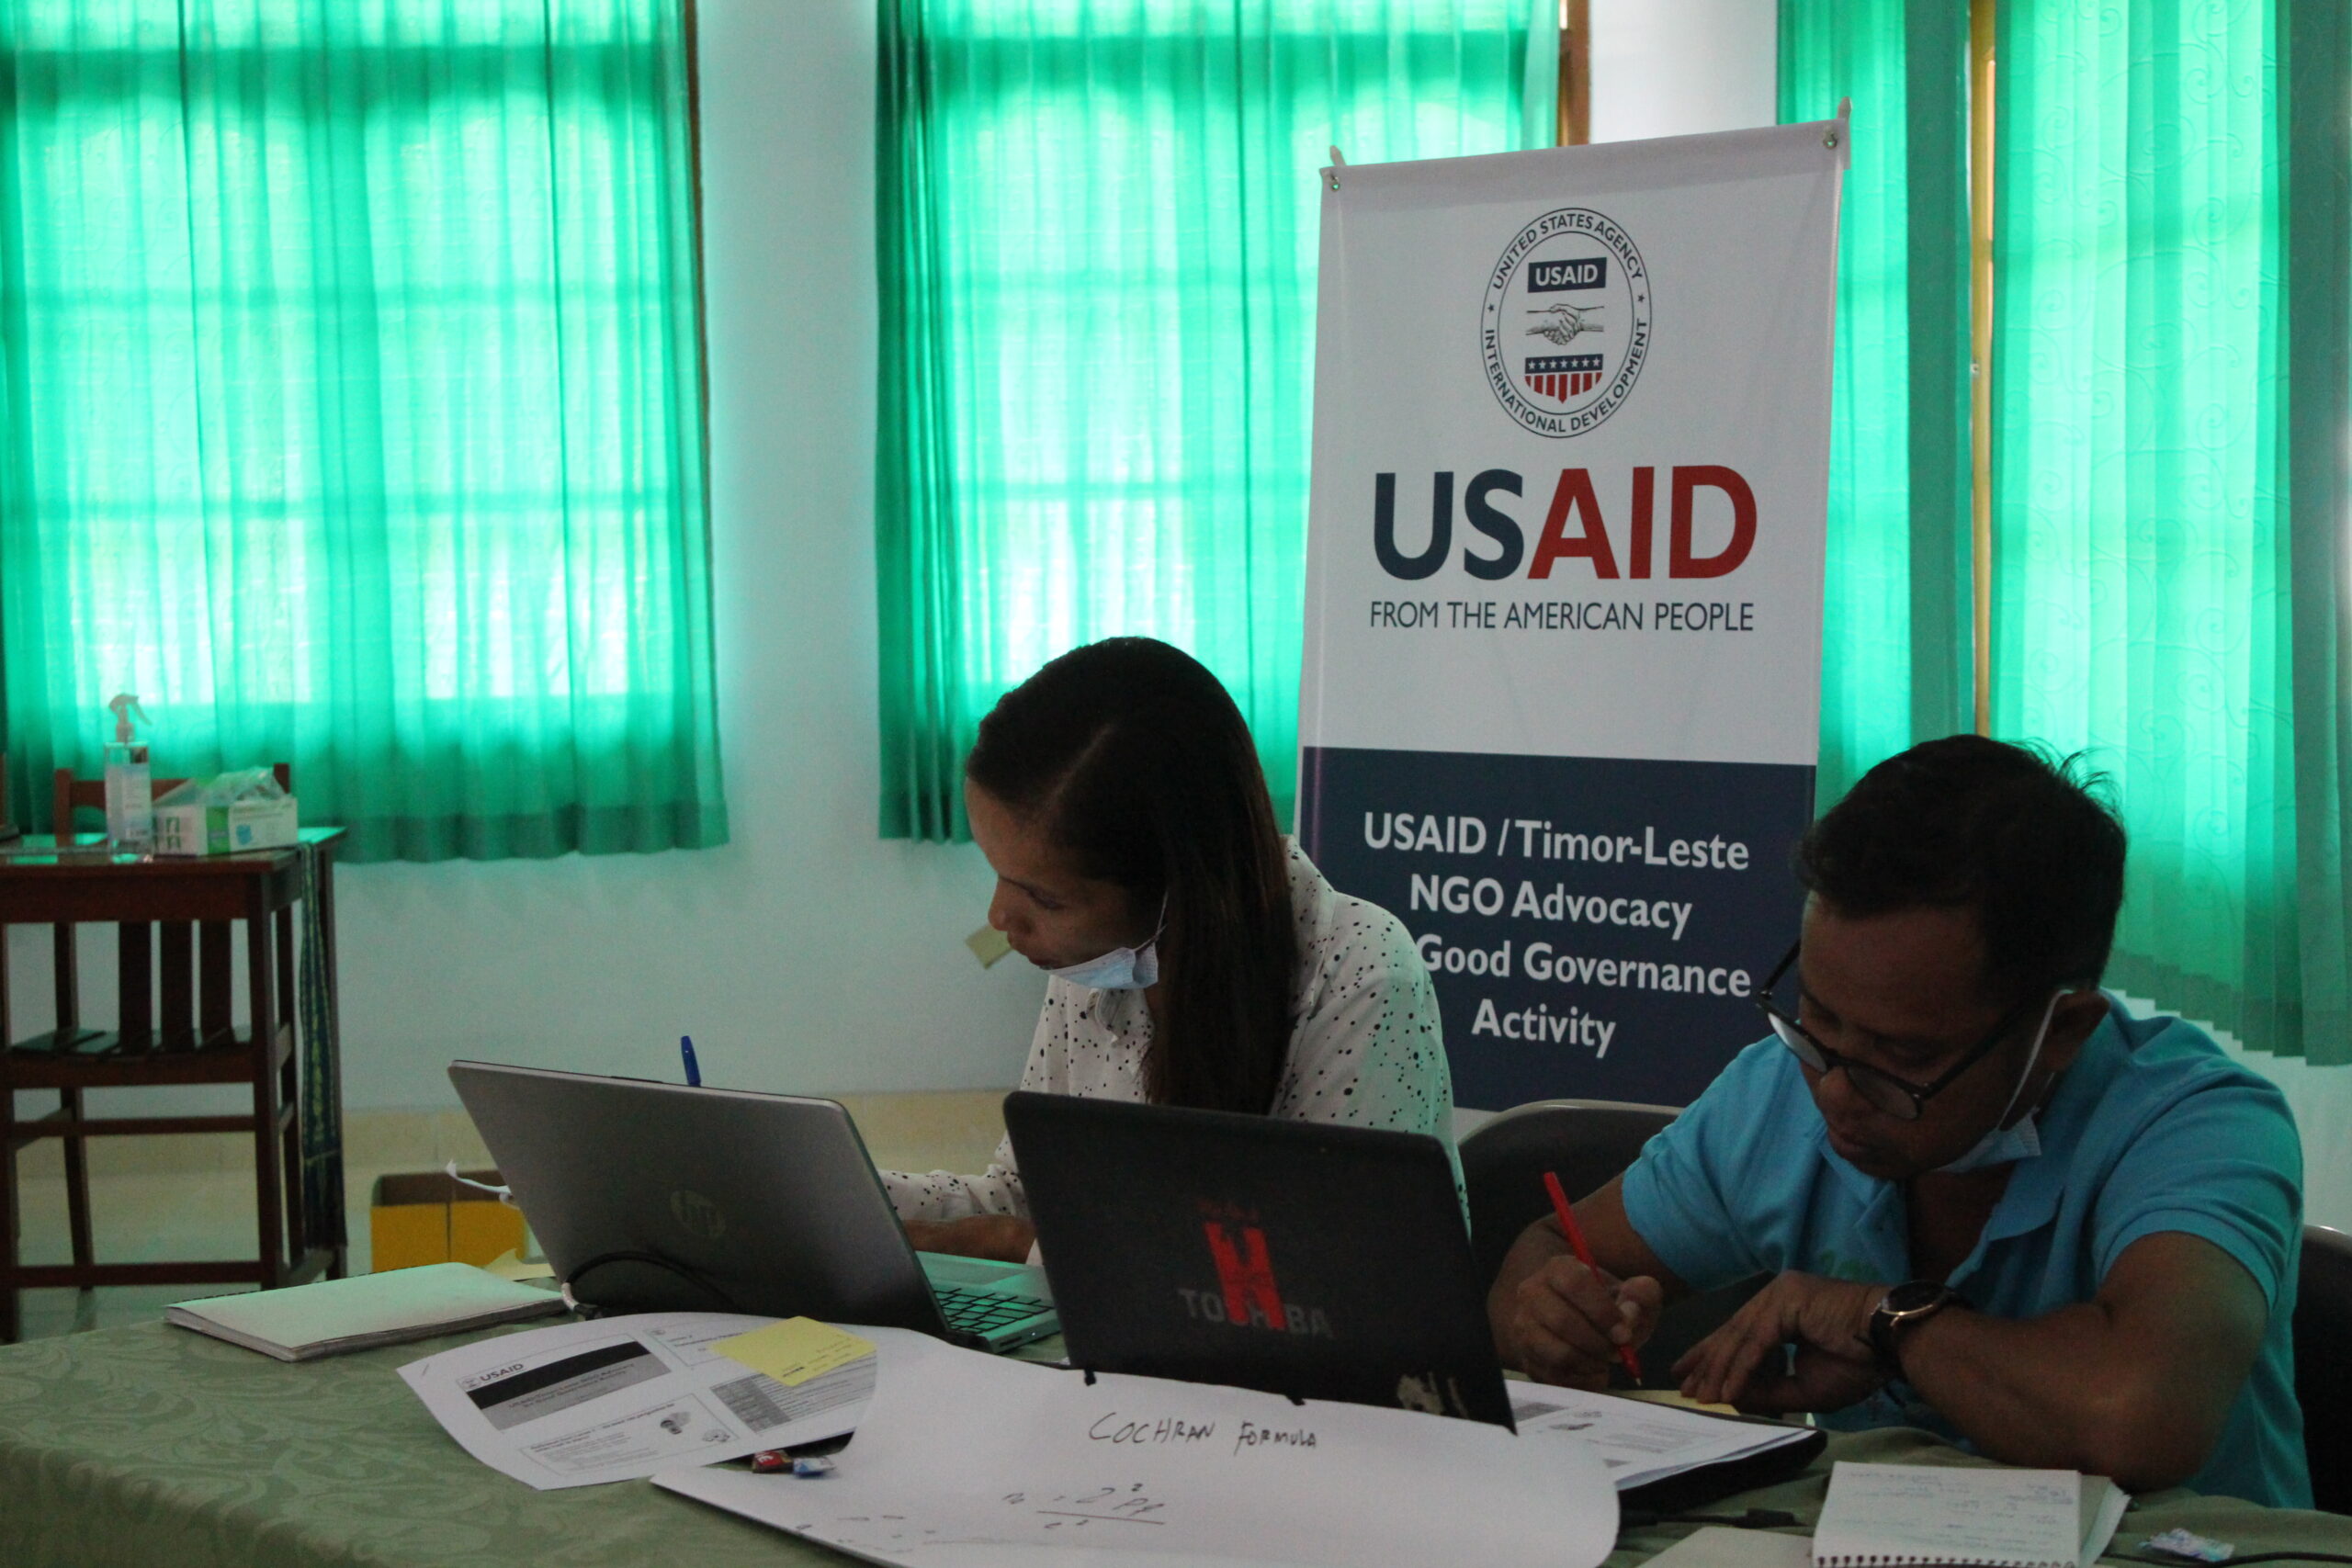 Moniz and a colleague working at computers at a training in front of USAID banner.